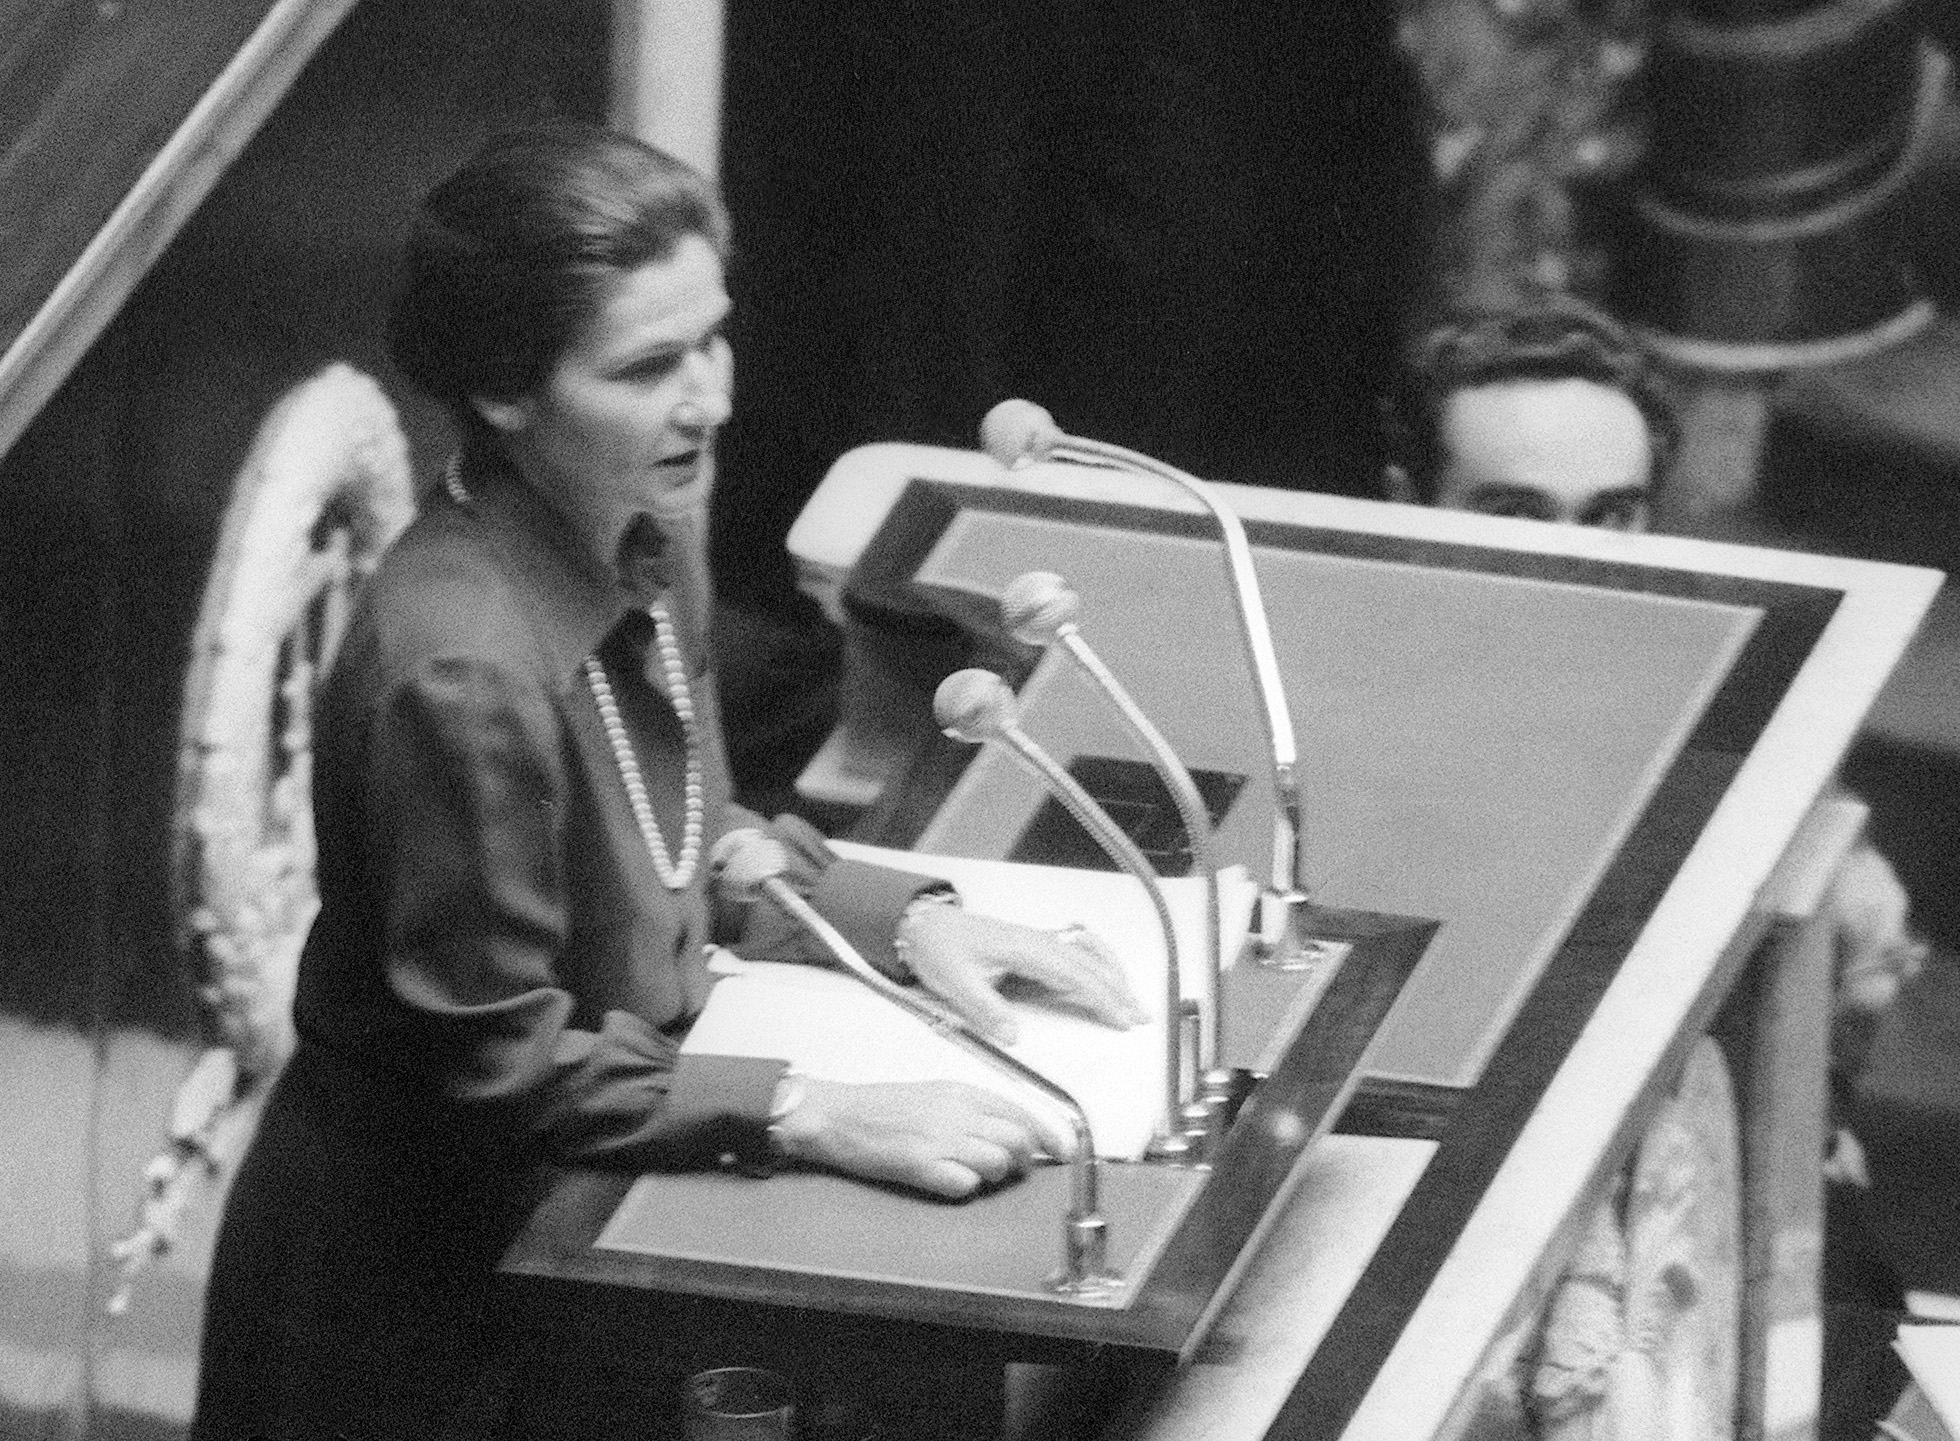 Simone Veil health ministry since May 1974 under t